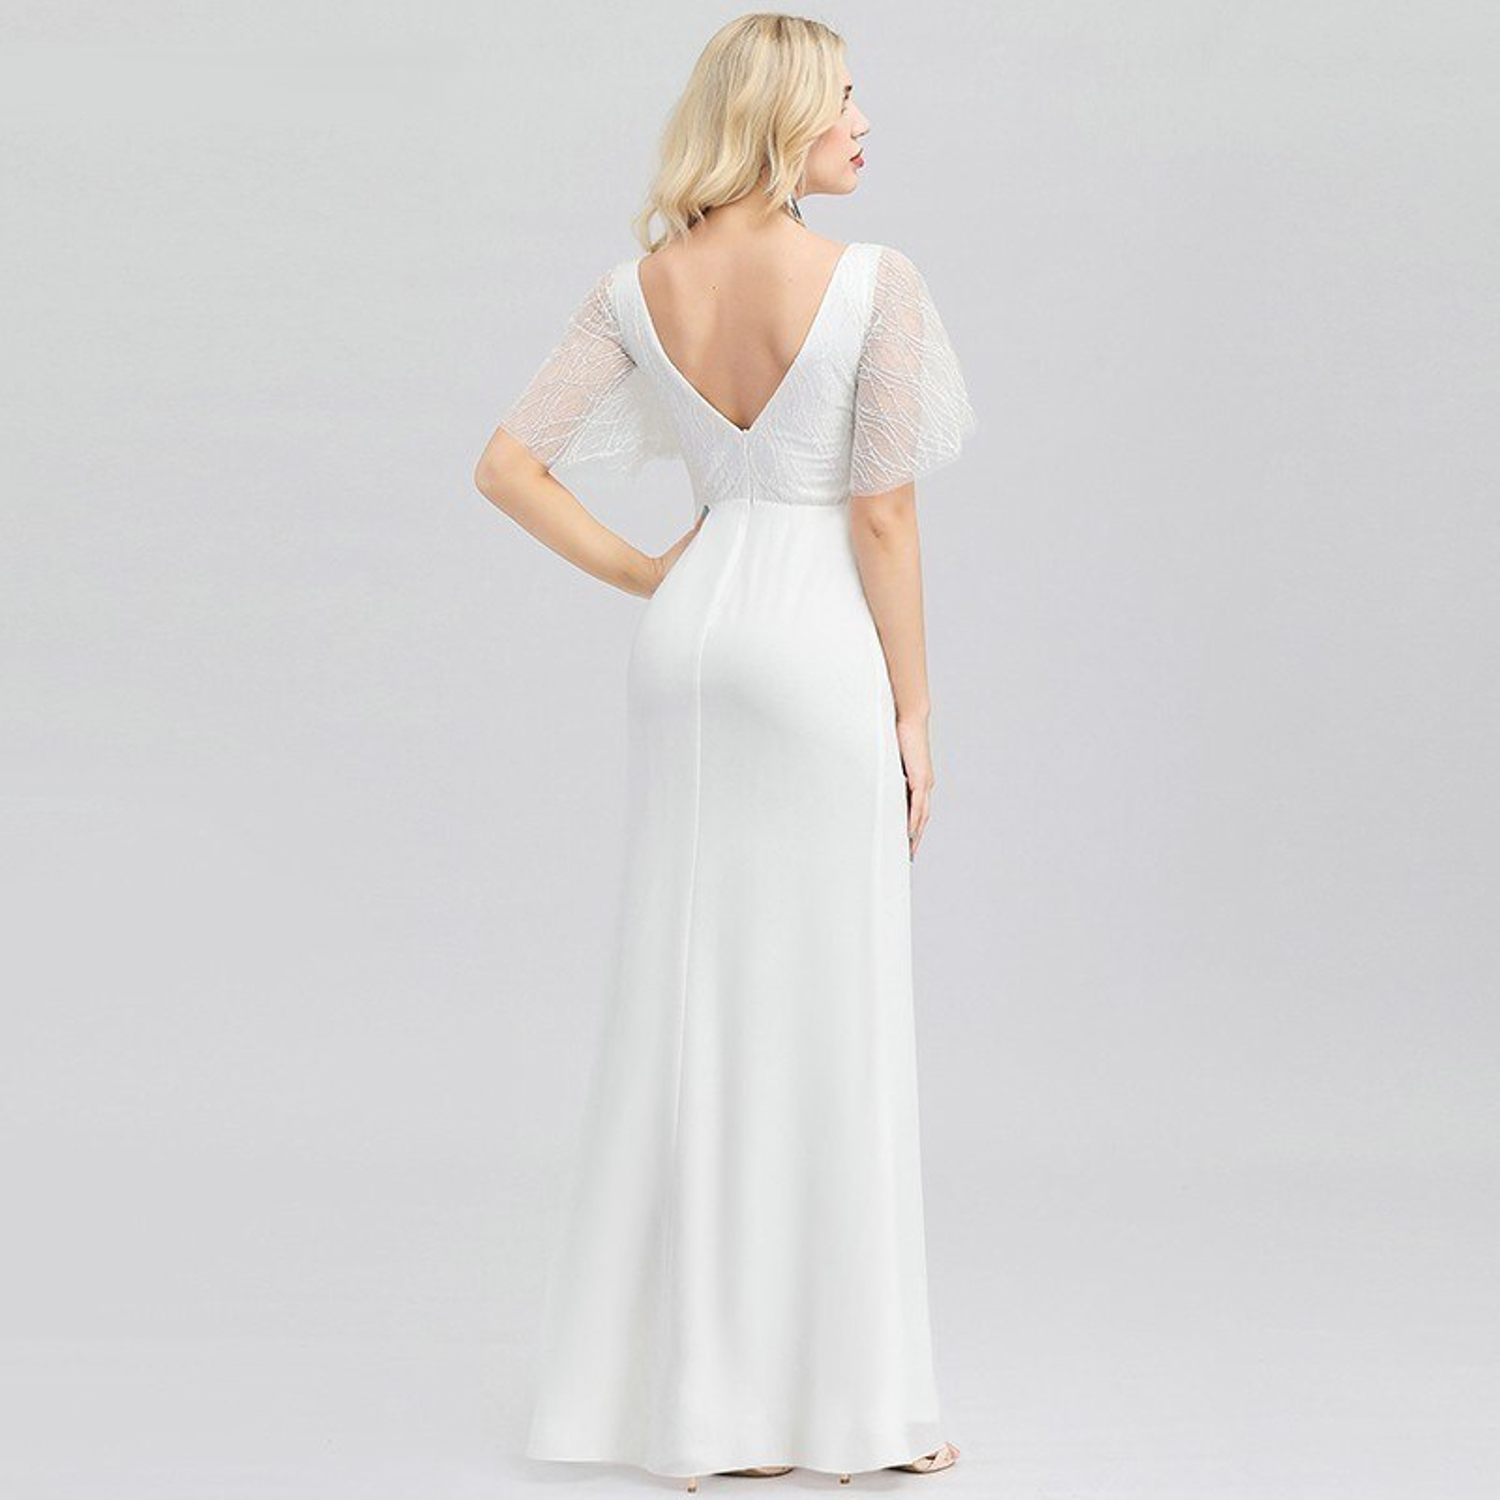 Low back wedding dress with flutter sleeves